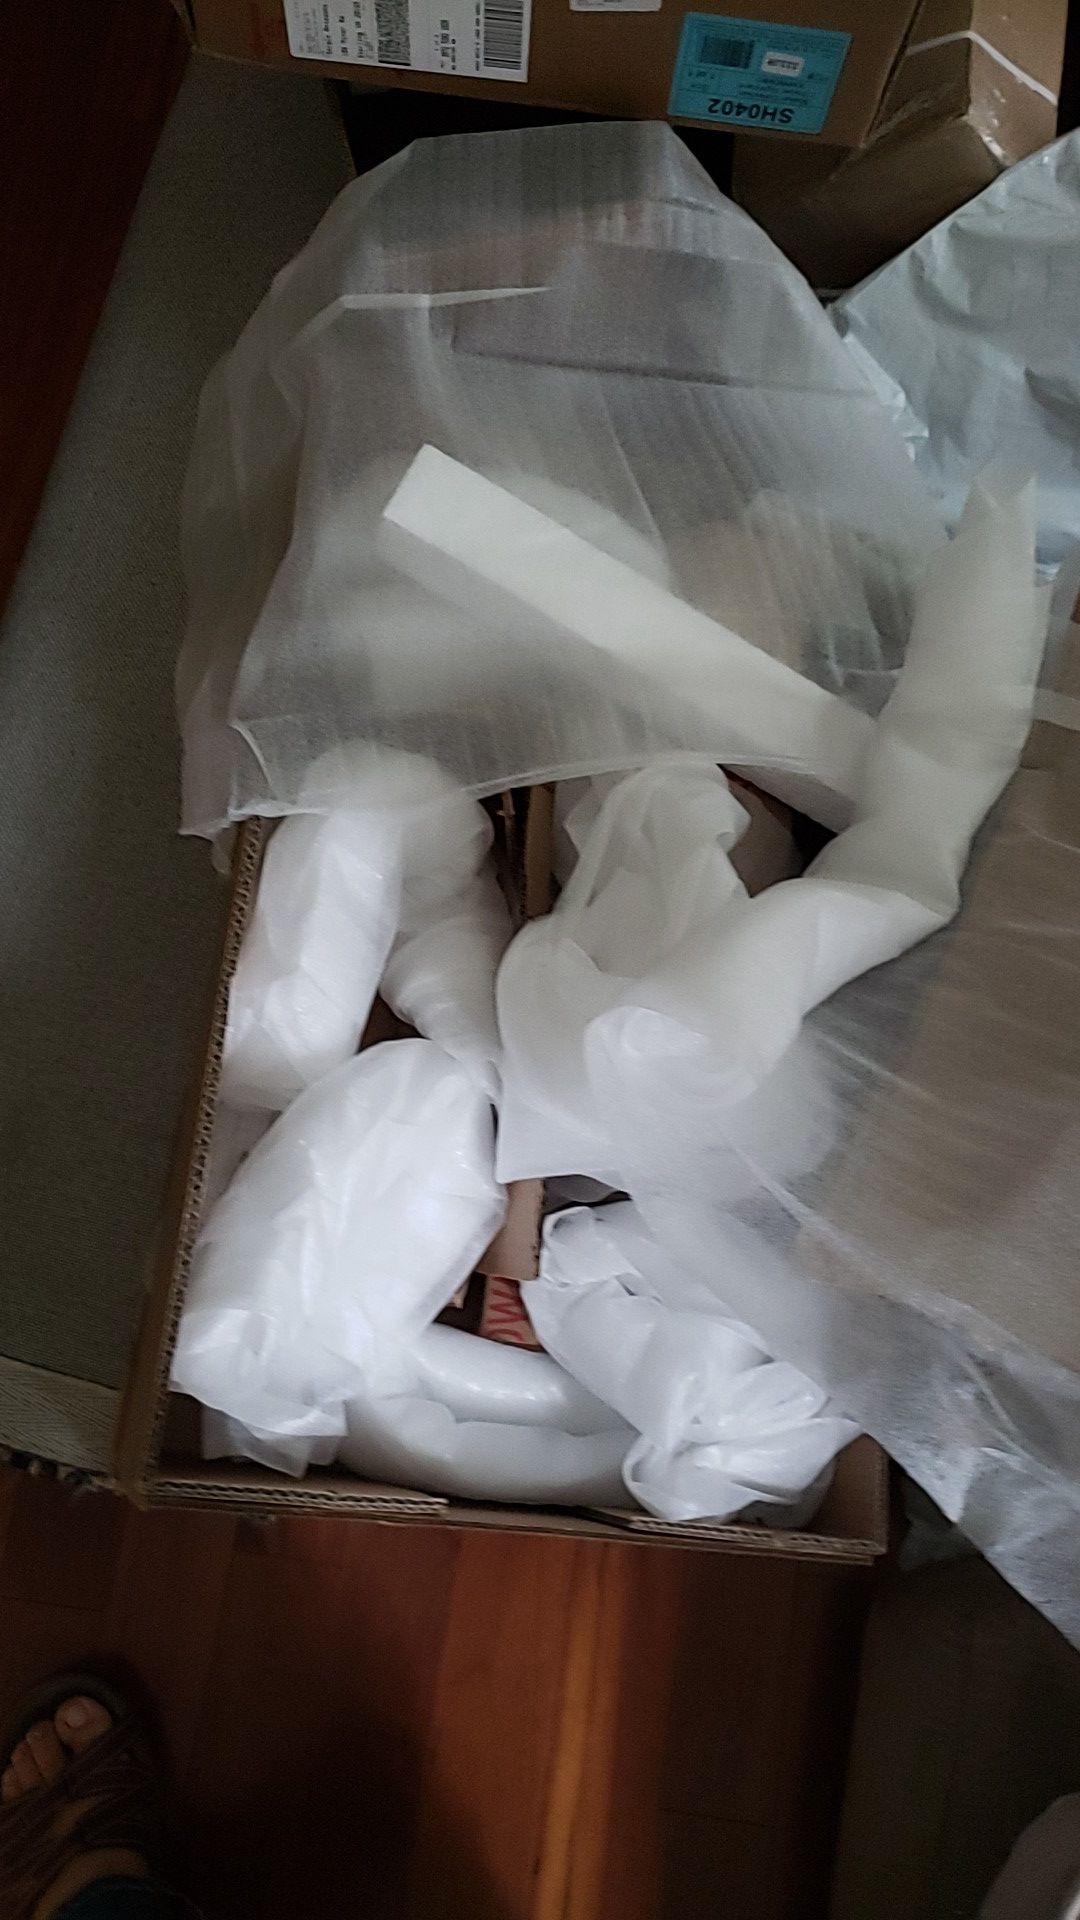 Styrofoam and packing material